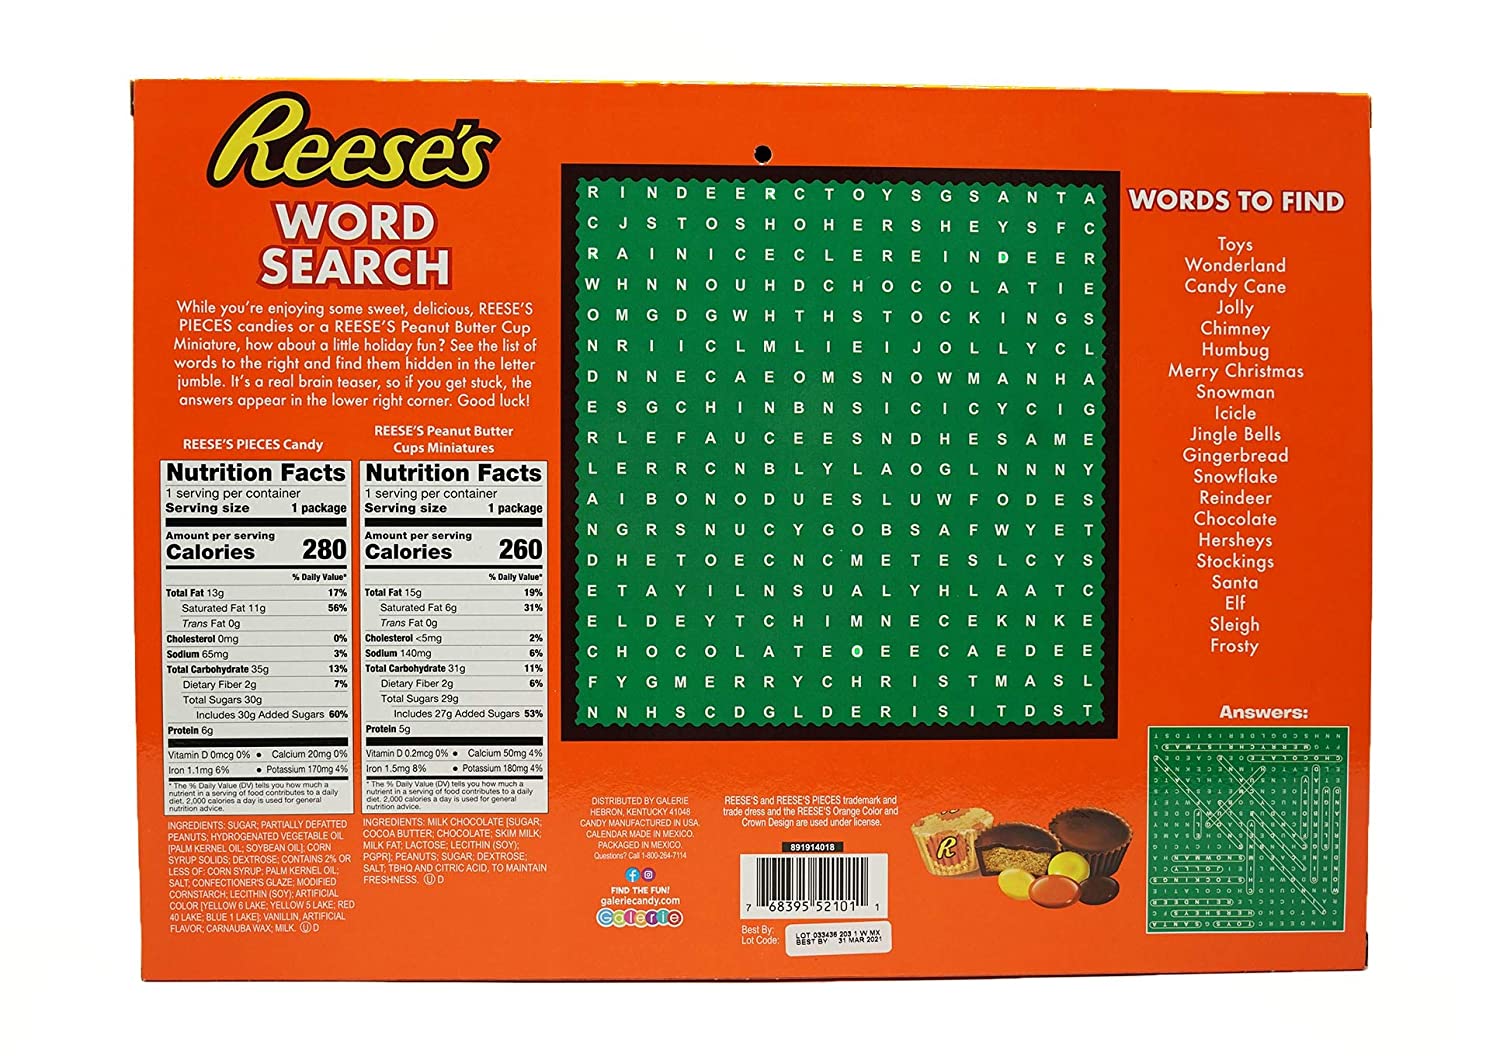 2022 Reese's Holiday Countdown Advent Calendar with Reese's Peanut Butter Cups and Candy Pieces, Pack Of 1 (1.76 Oz.) - image 2 of 3